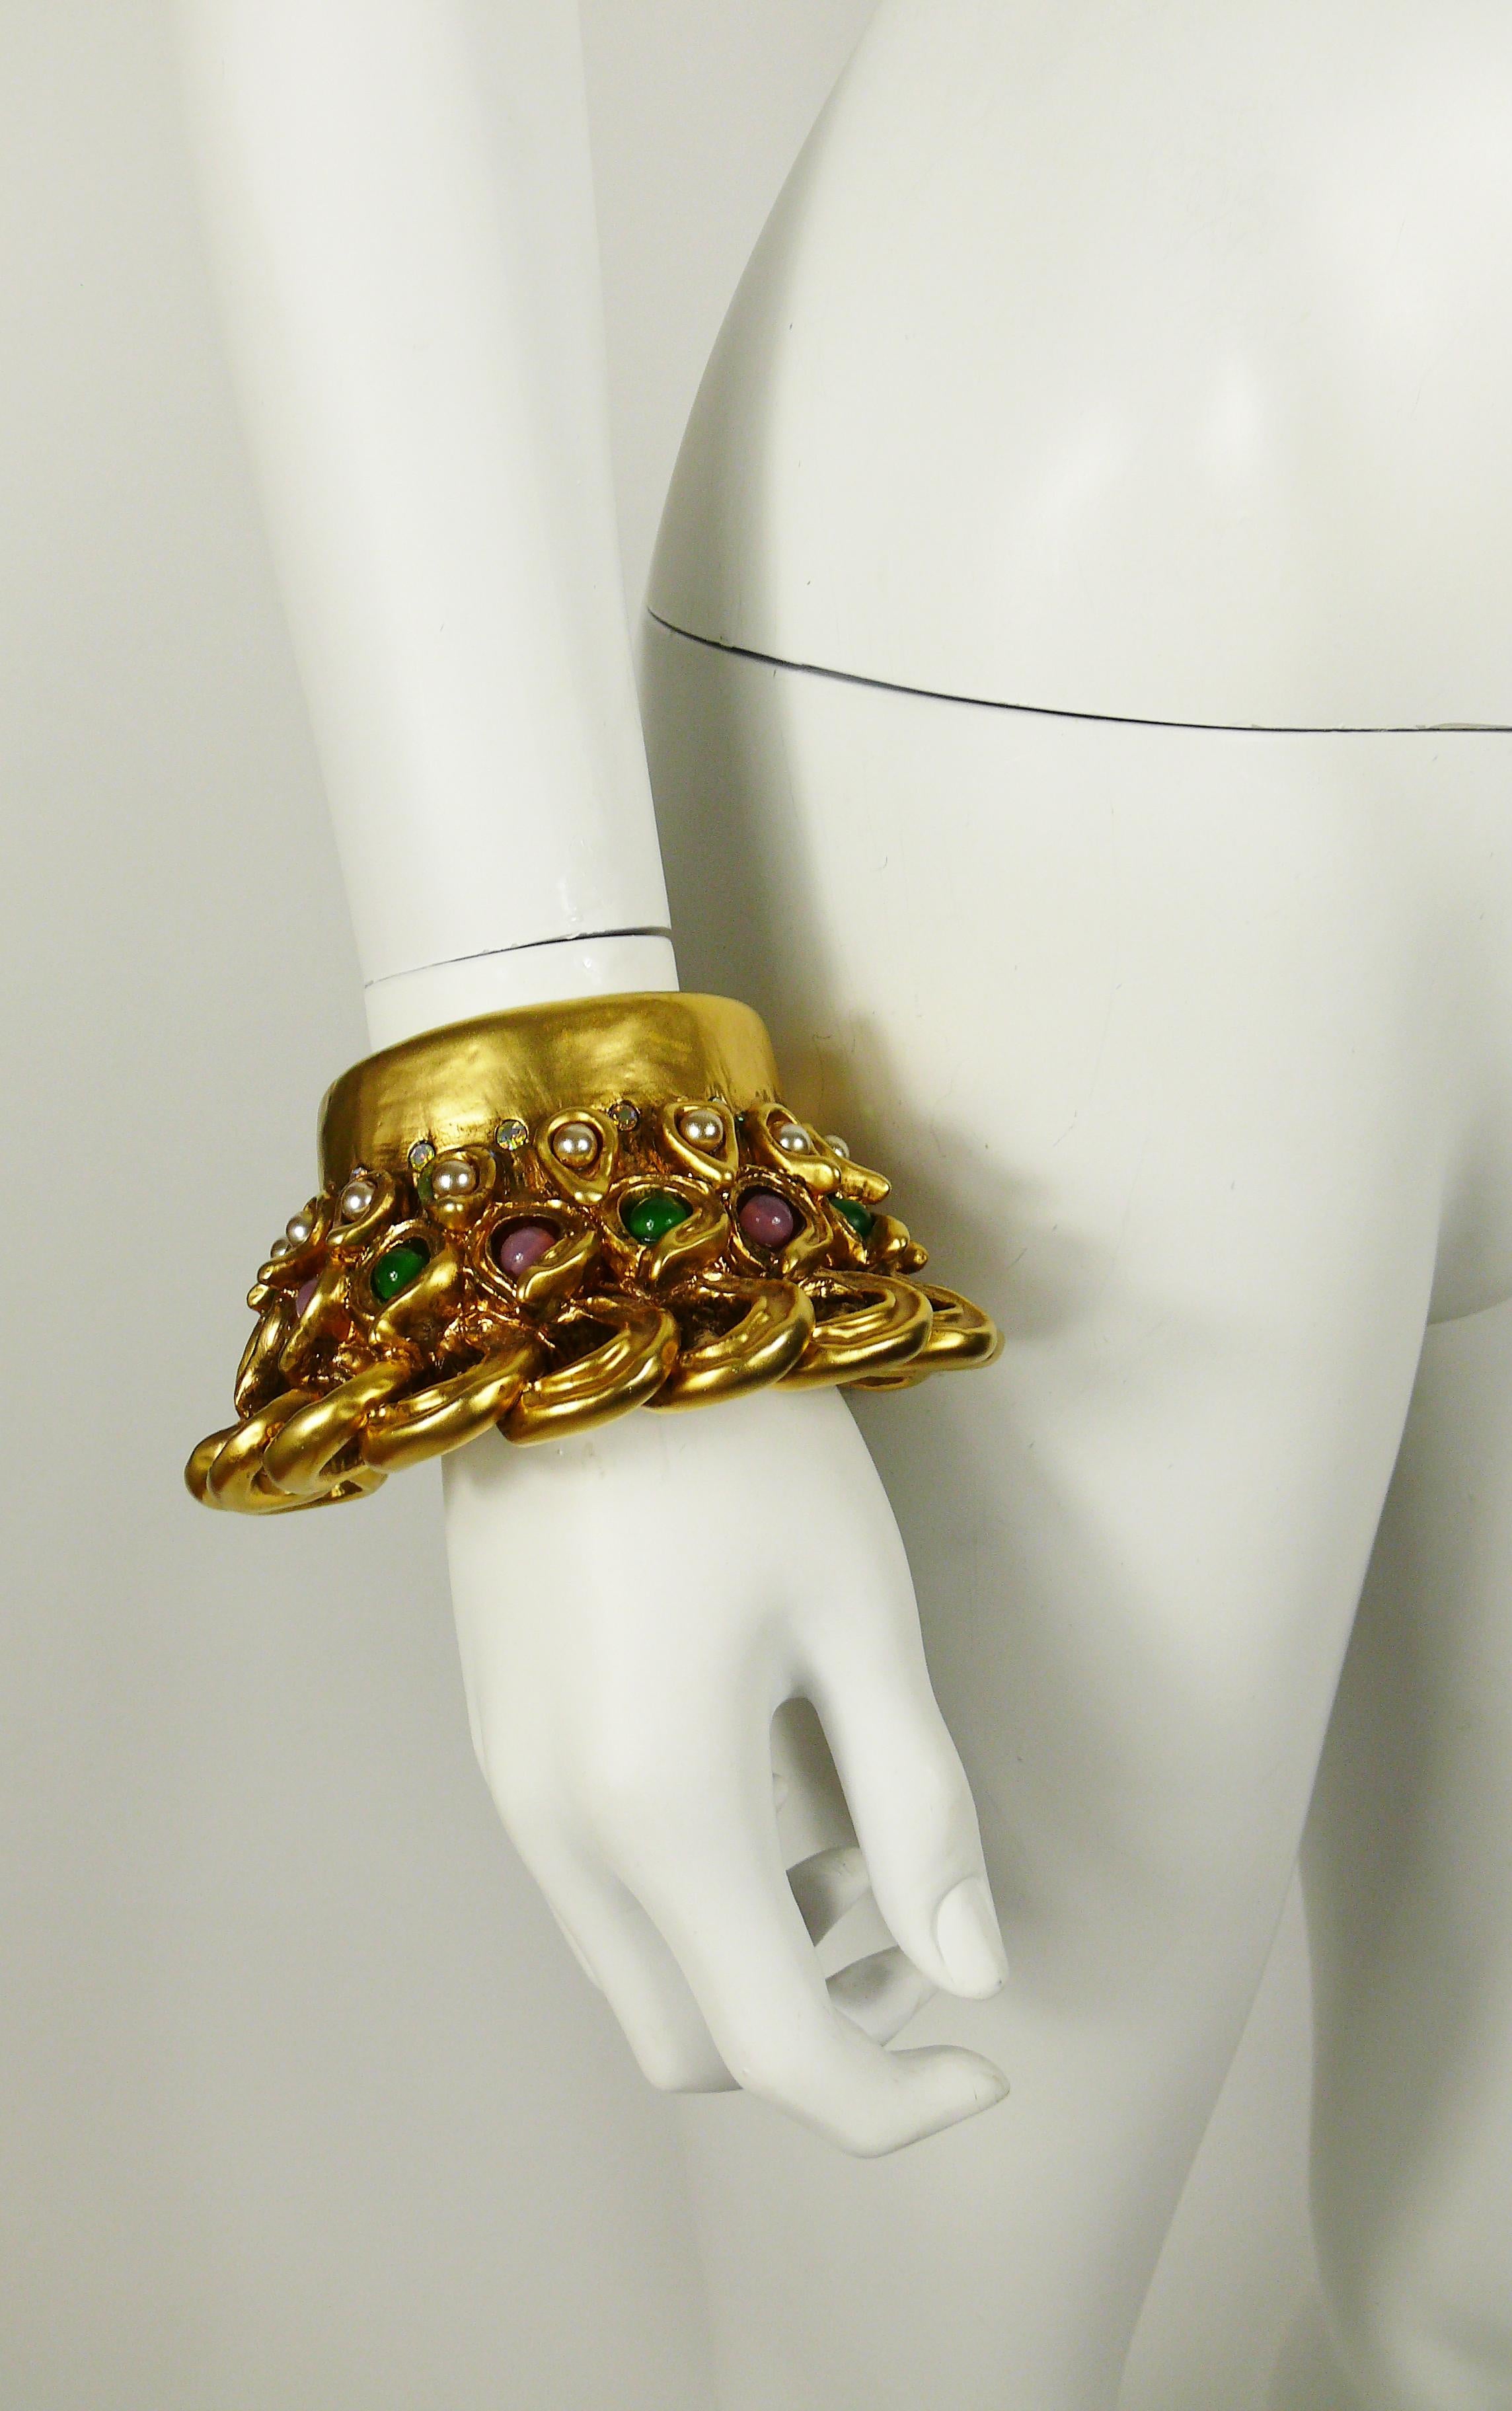 CLAIRE DEVE vintage massive gold toned resin cuff bracelet embellished with multicolored glass beads, faux pearls and crystals.

Embossed CLAIRE DEVE Paris.

Indicative measurements : inner circumference approx. 17.91 cm (7.05 inches) / max. width